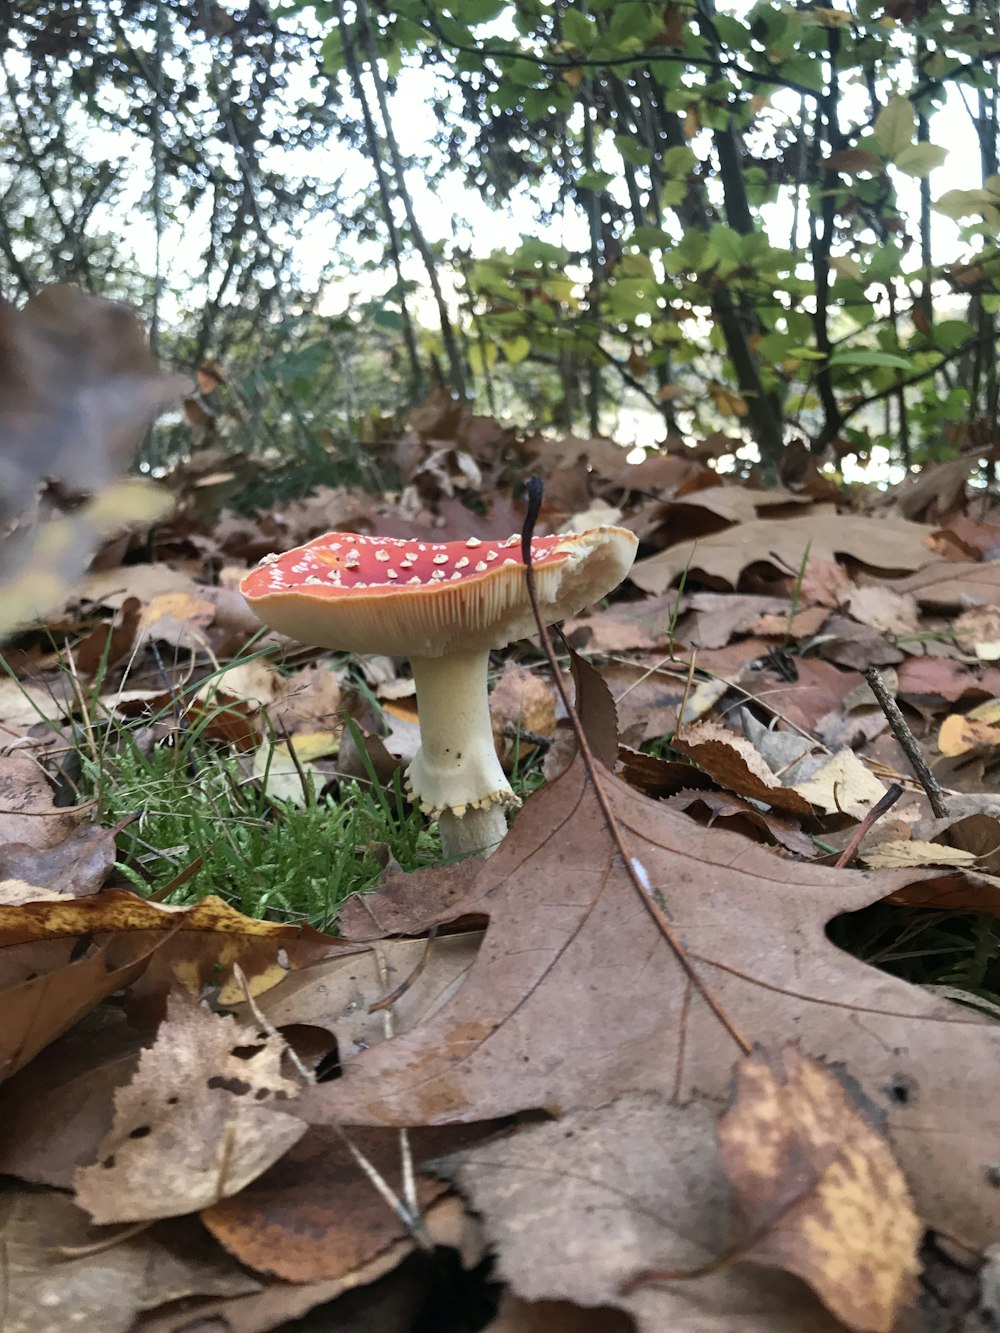 a small mushroom sitting on top of a pile of leaves